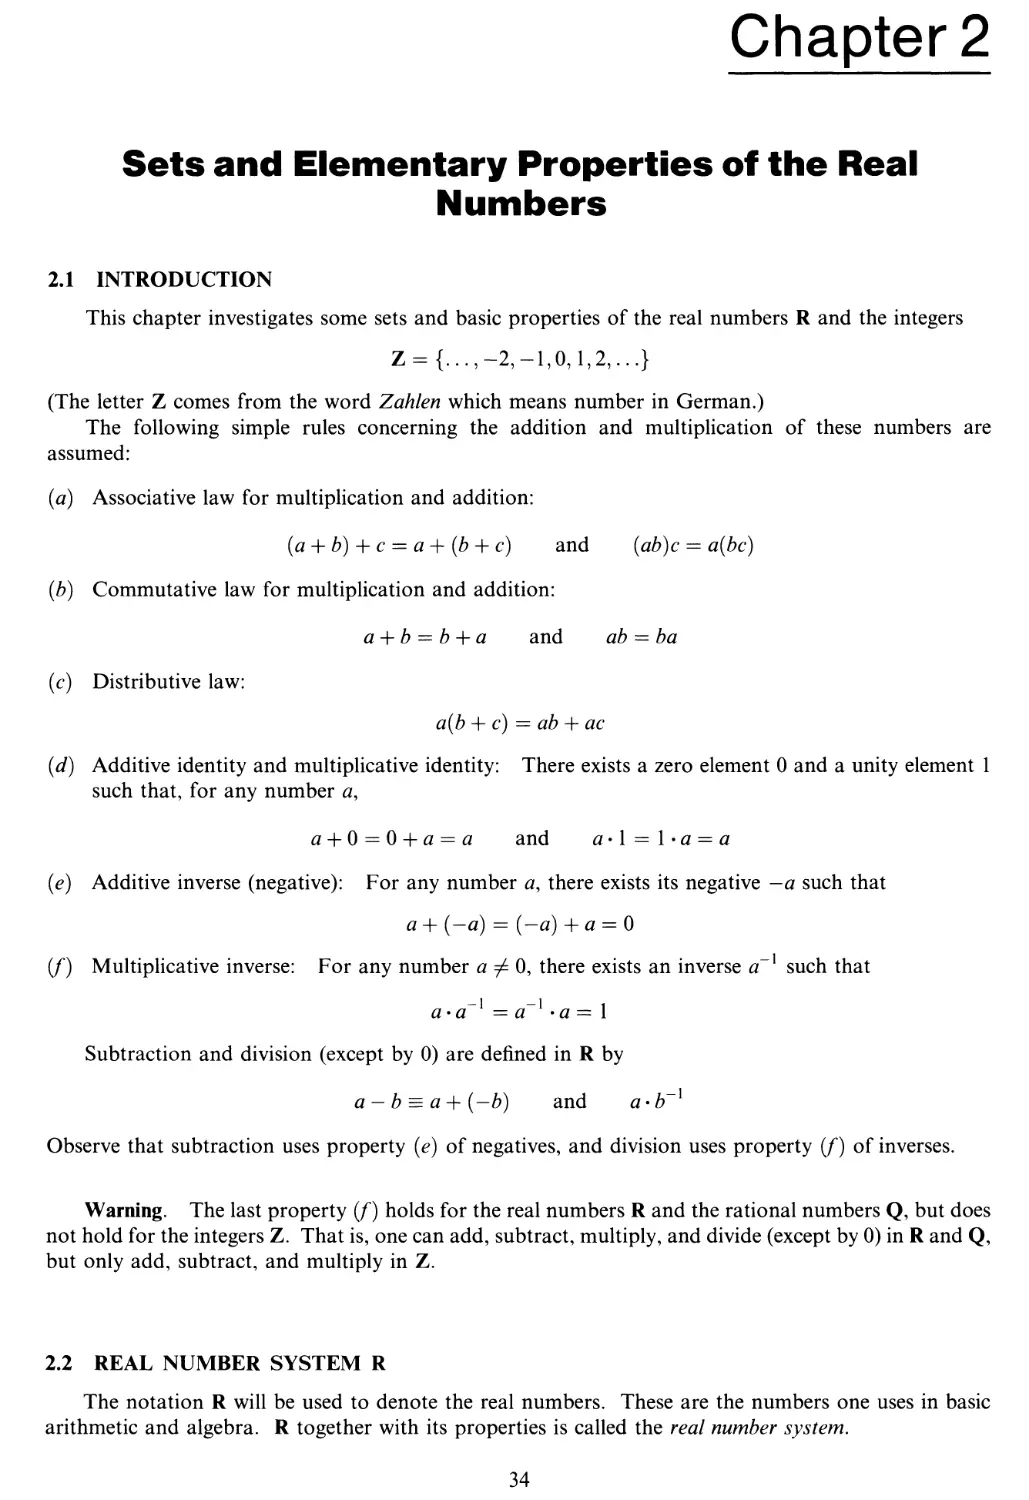 Chapter 2 SETS AND ELEMENTARY PROPERTIES OF THE REAL NUMBERS
2.2 Real number system $\mathbb{R}$